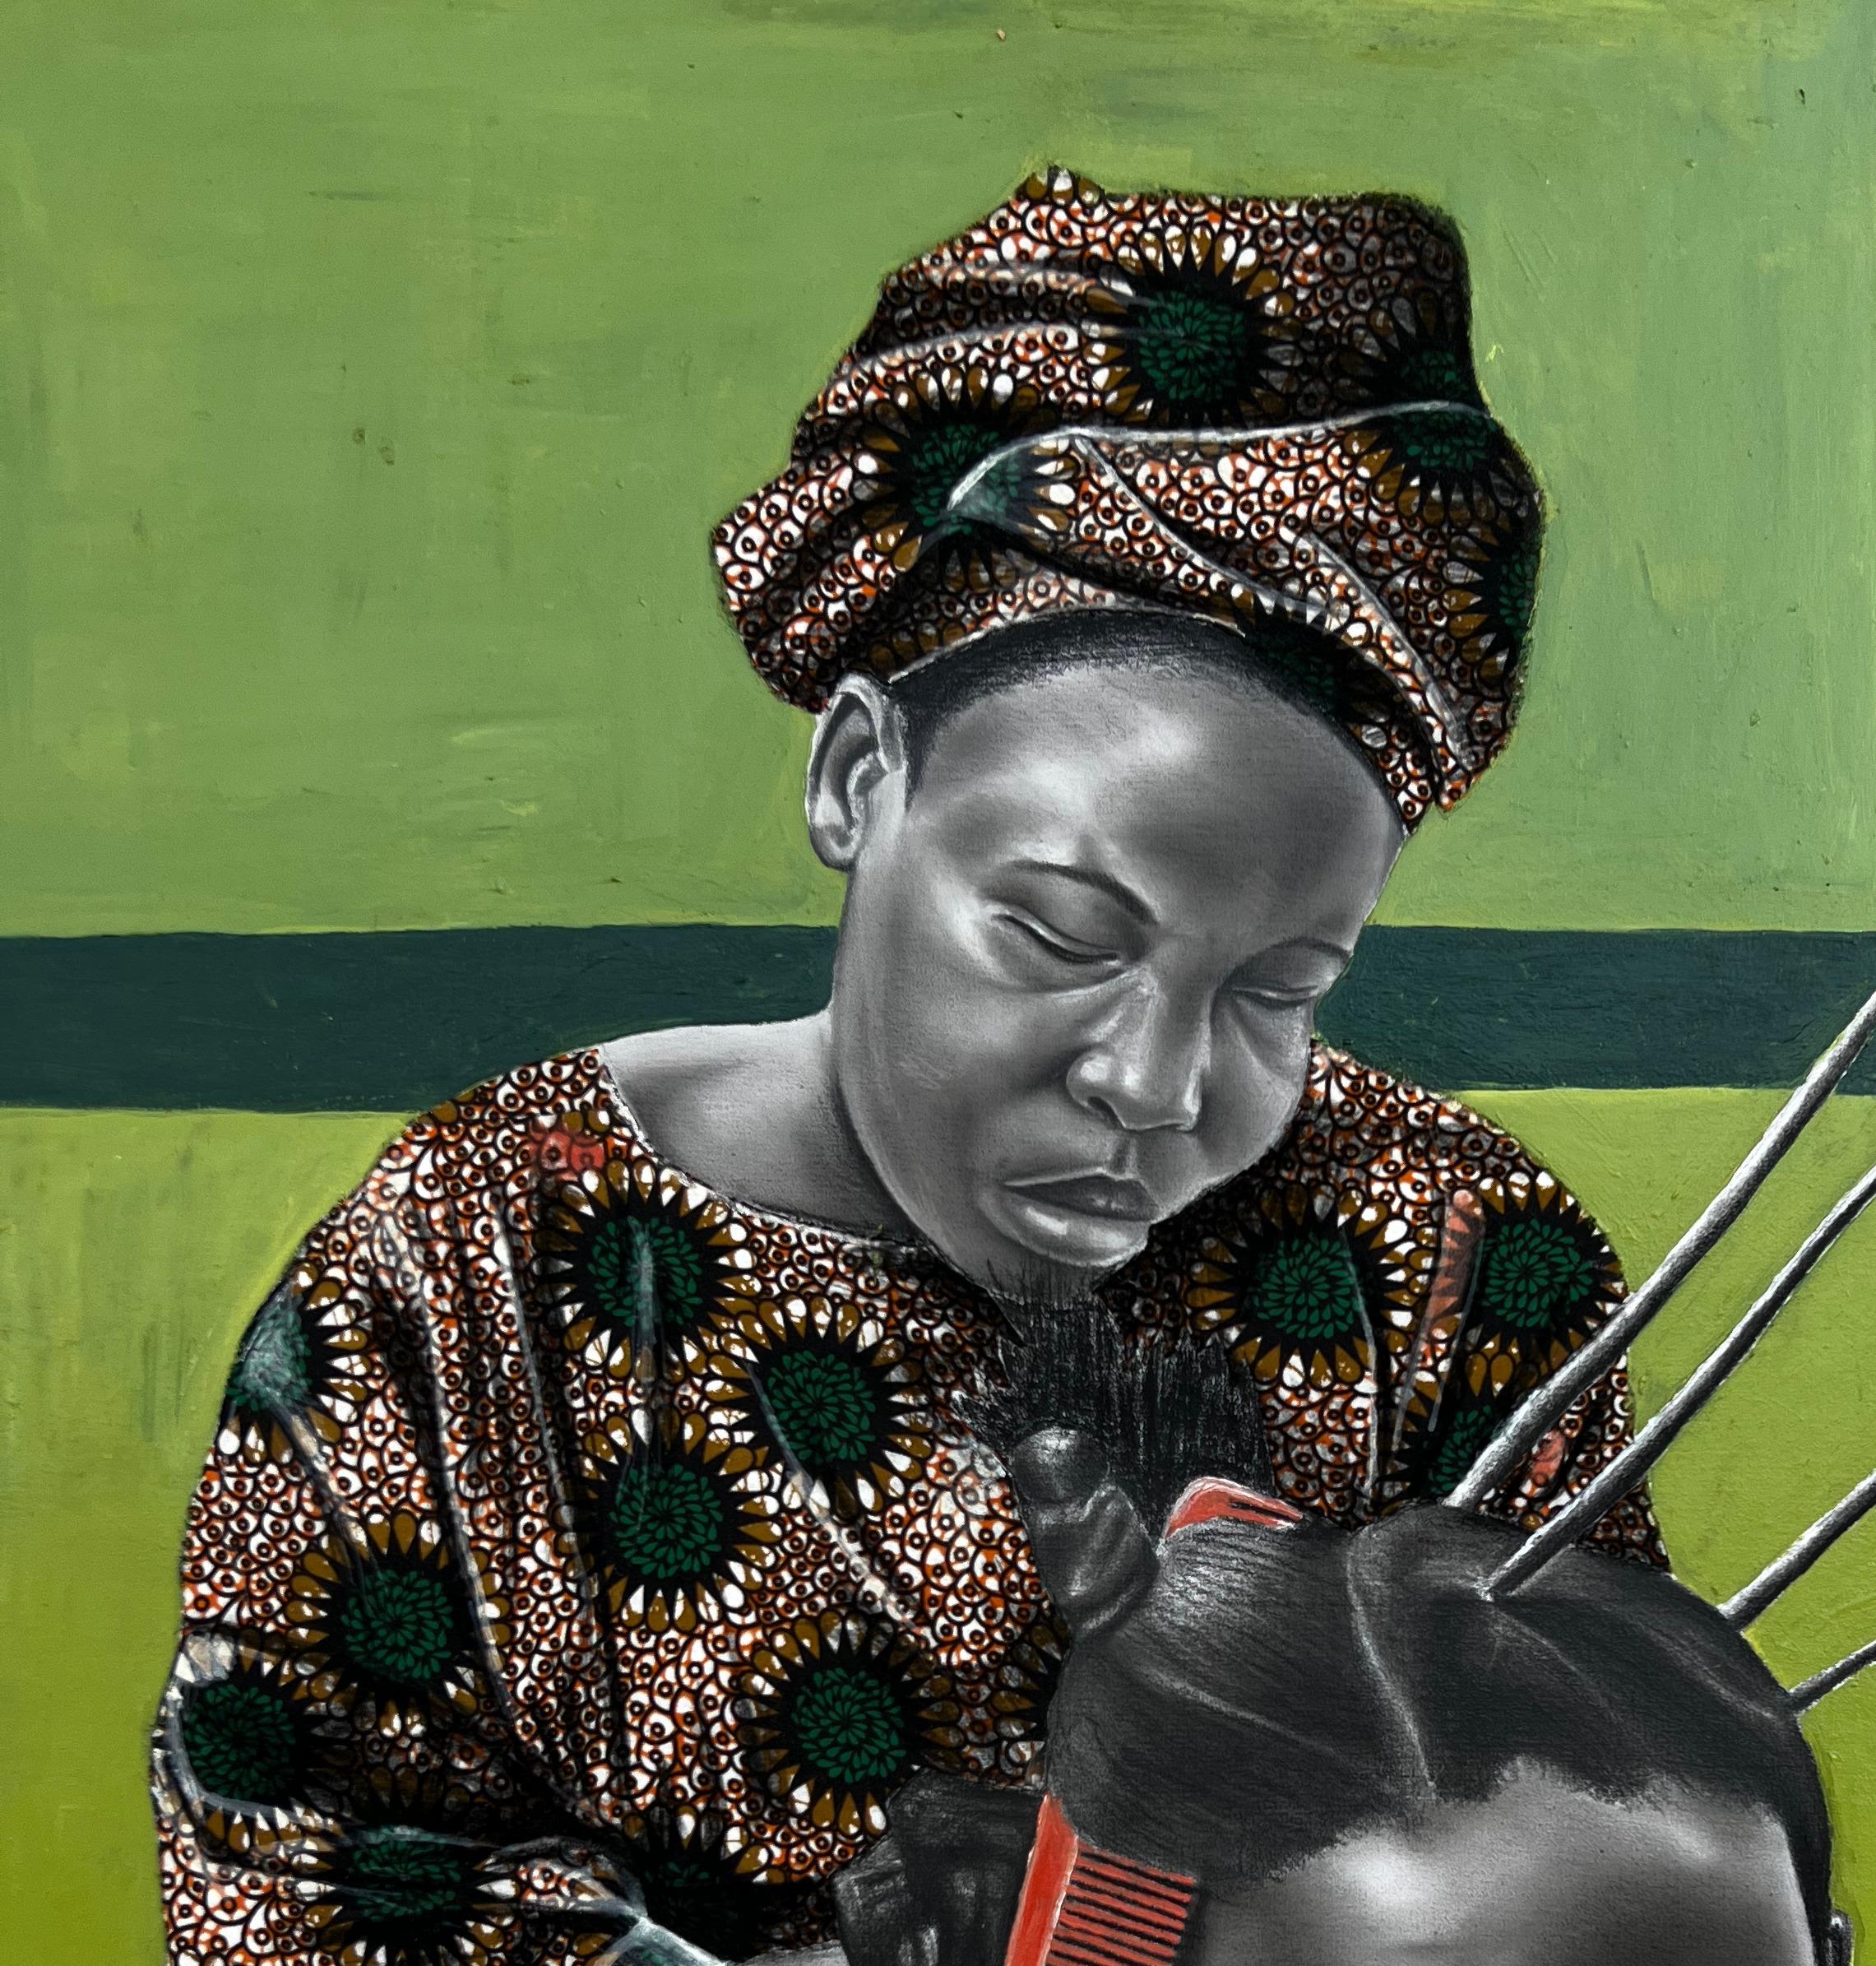 For Tomorrow's Festival  - Painting by Ademola Clement Ajayi